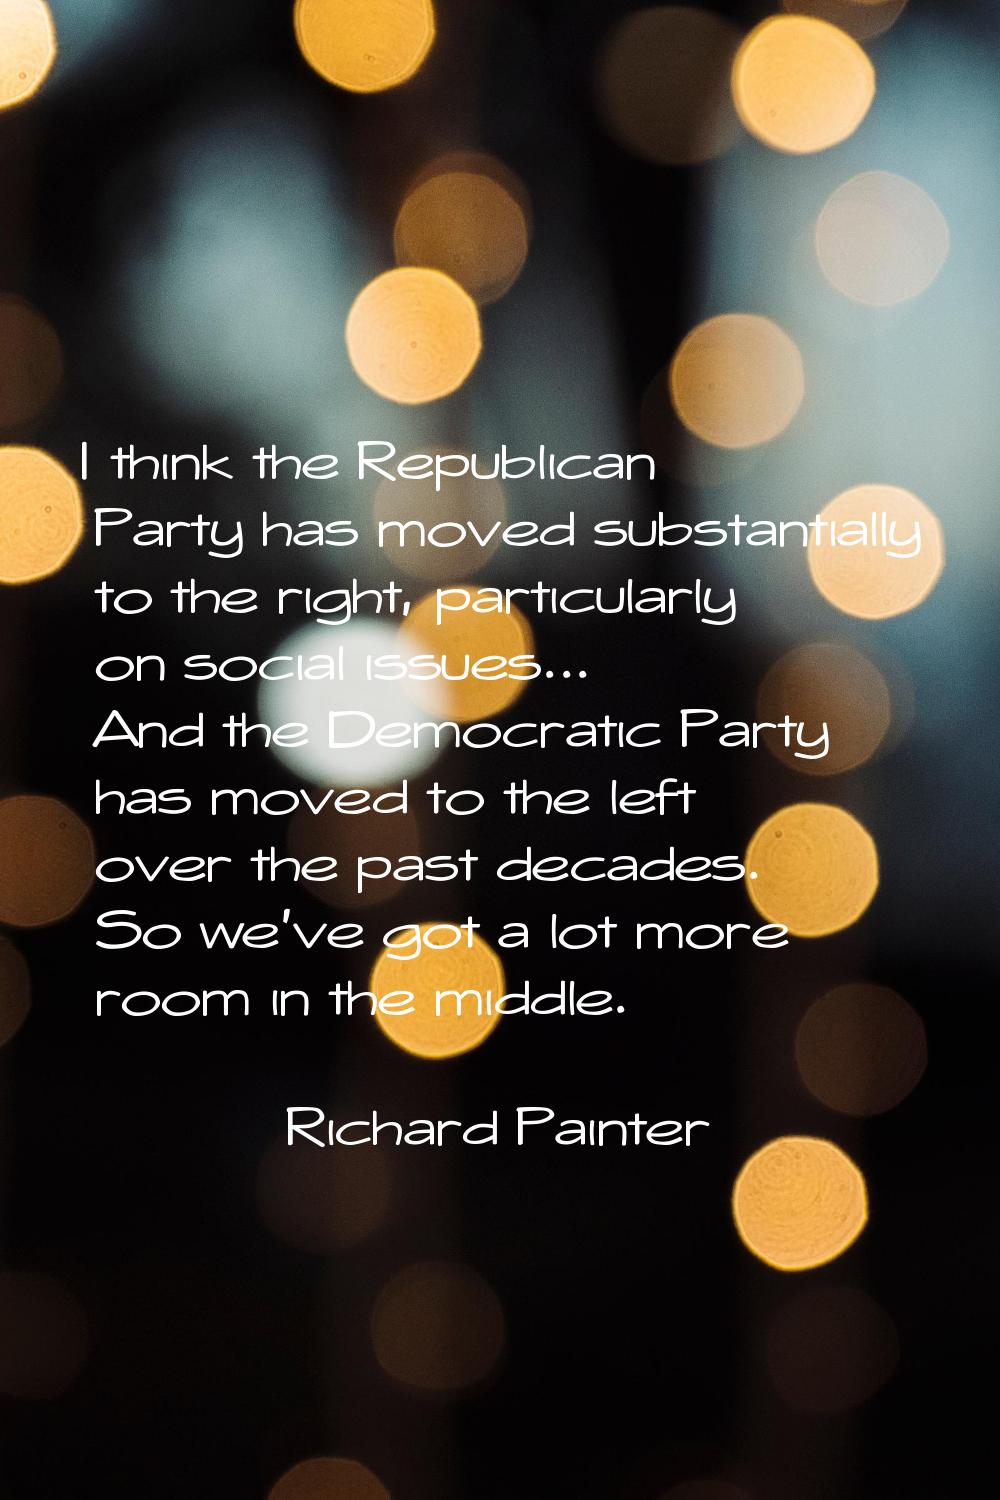 I think the Republican Party has moved substantially to the right, particularly on social issues...